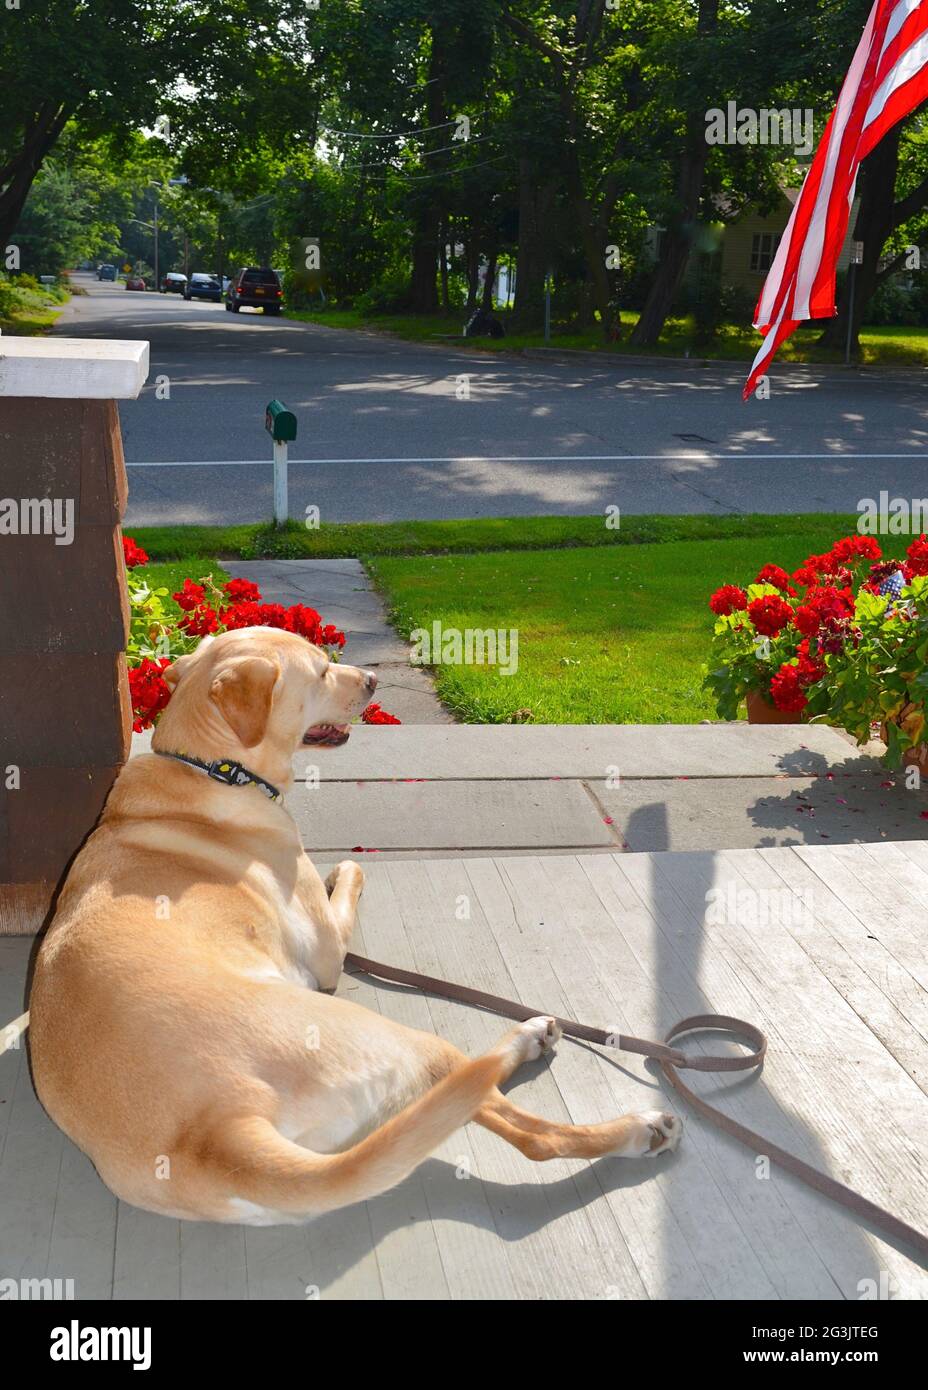 An Americana view of a yellow dog on a front porch with a flag and red geraniums. Stock Photo